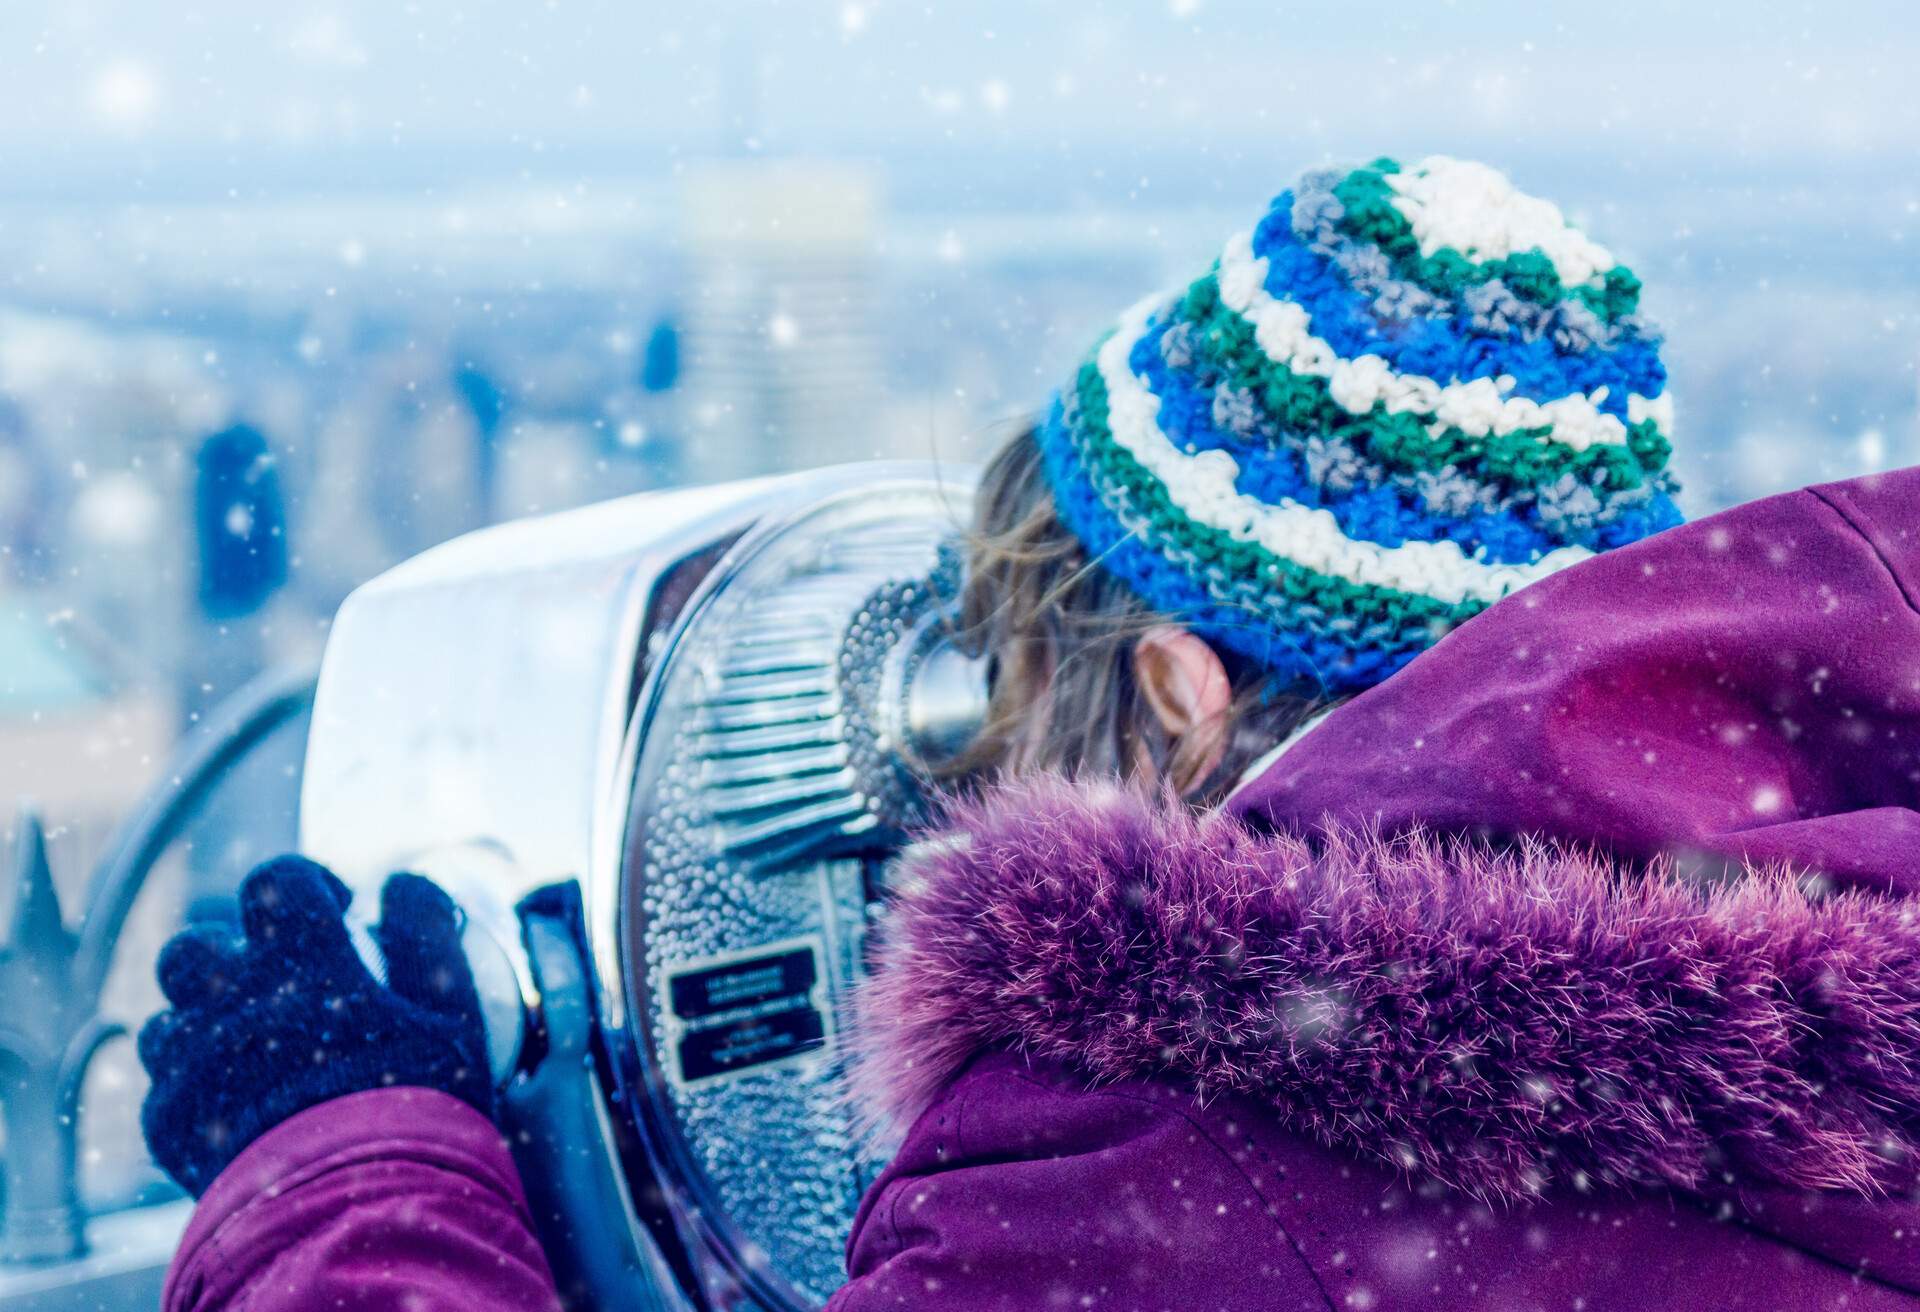 dest_usa_america_new_york_people_woman_winter_gettyimages-554462261_universal_within-usage-period_92414